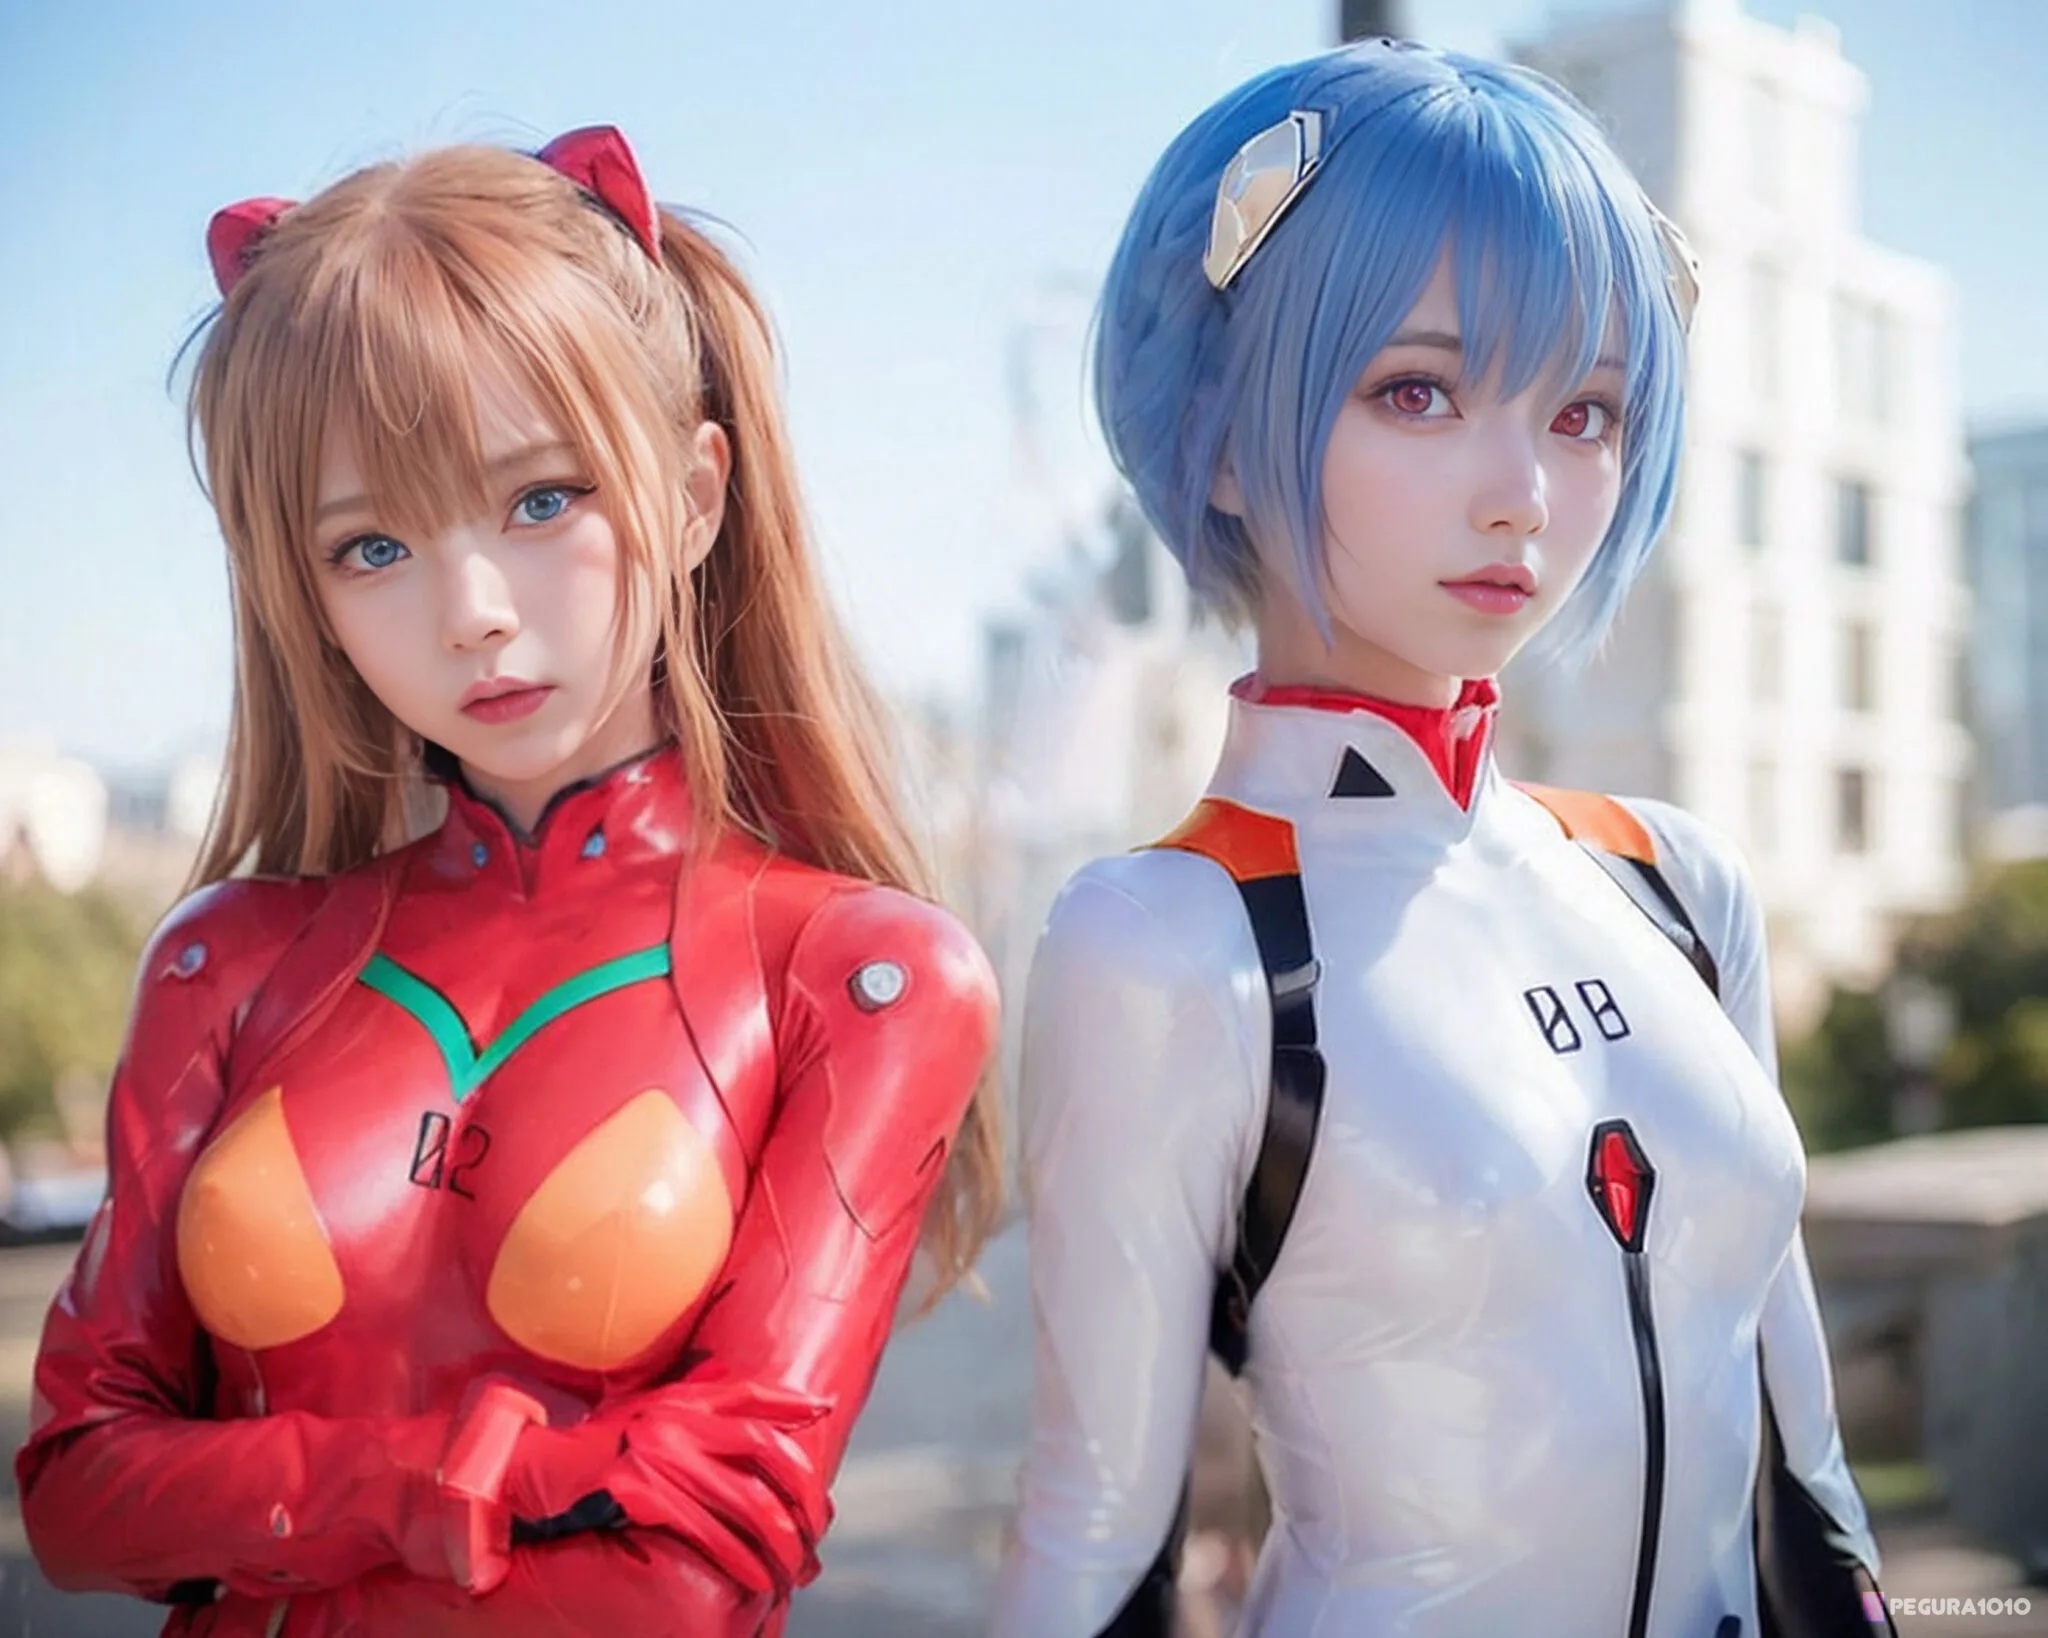 AI imagines Asuka and Rei as two real girls